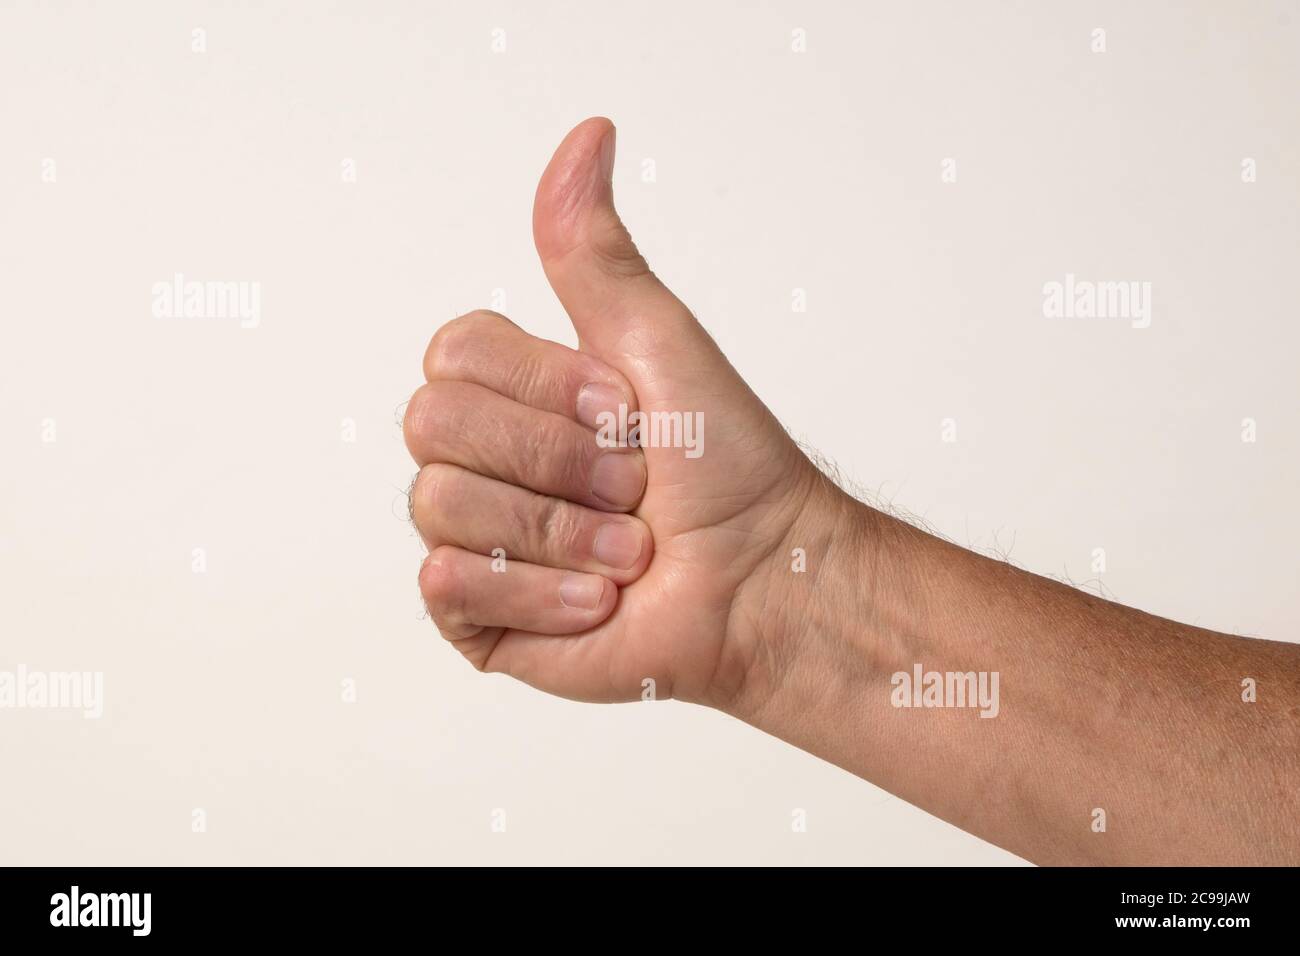 common sign of approval Stock Photo